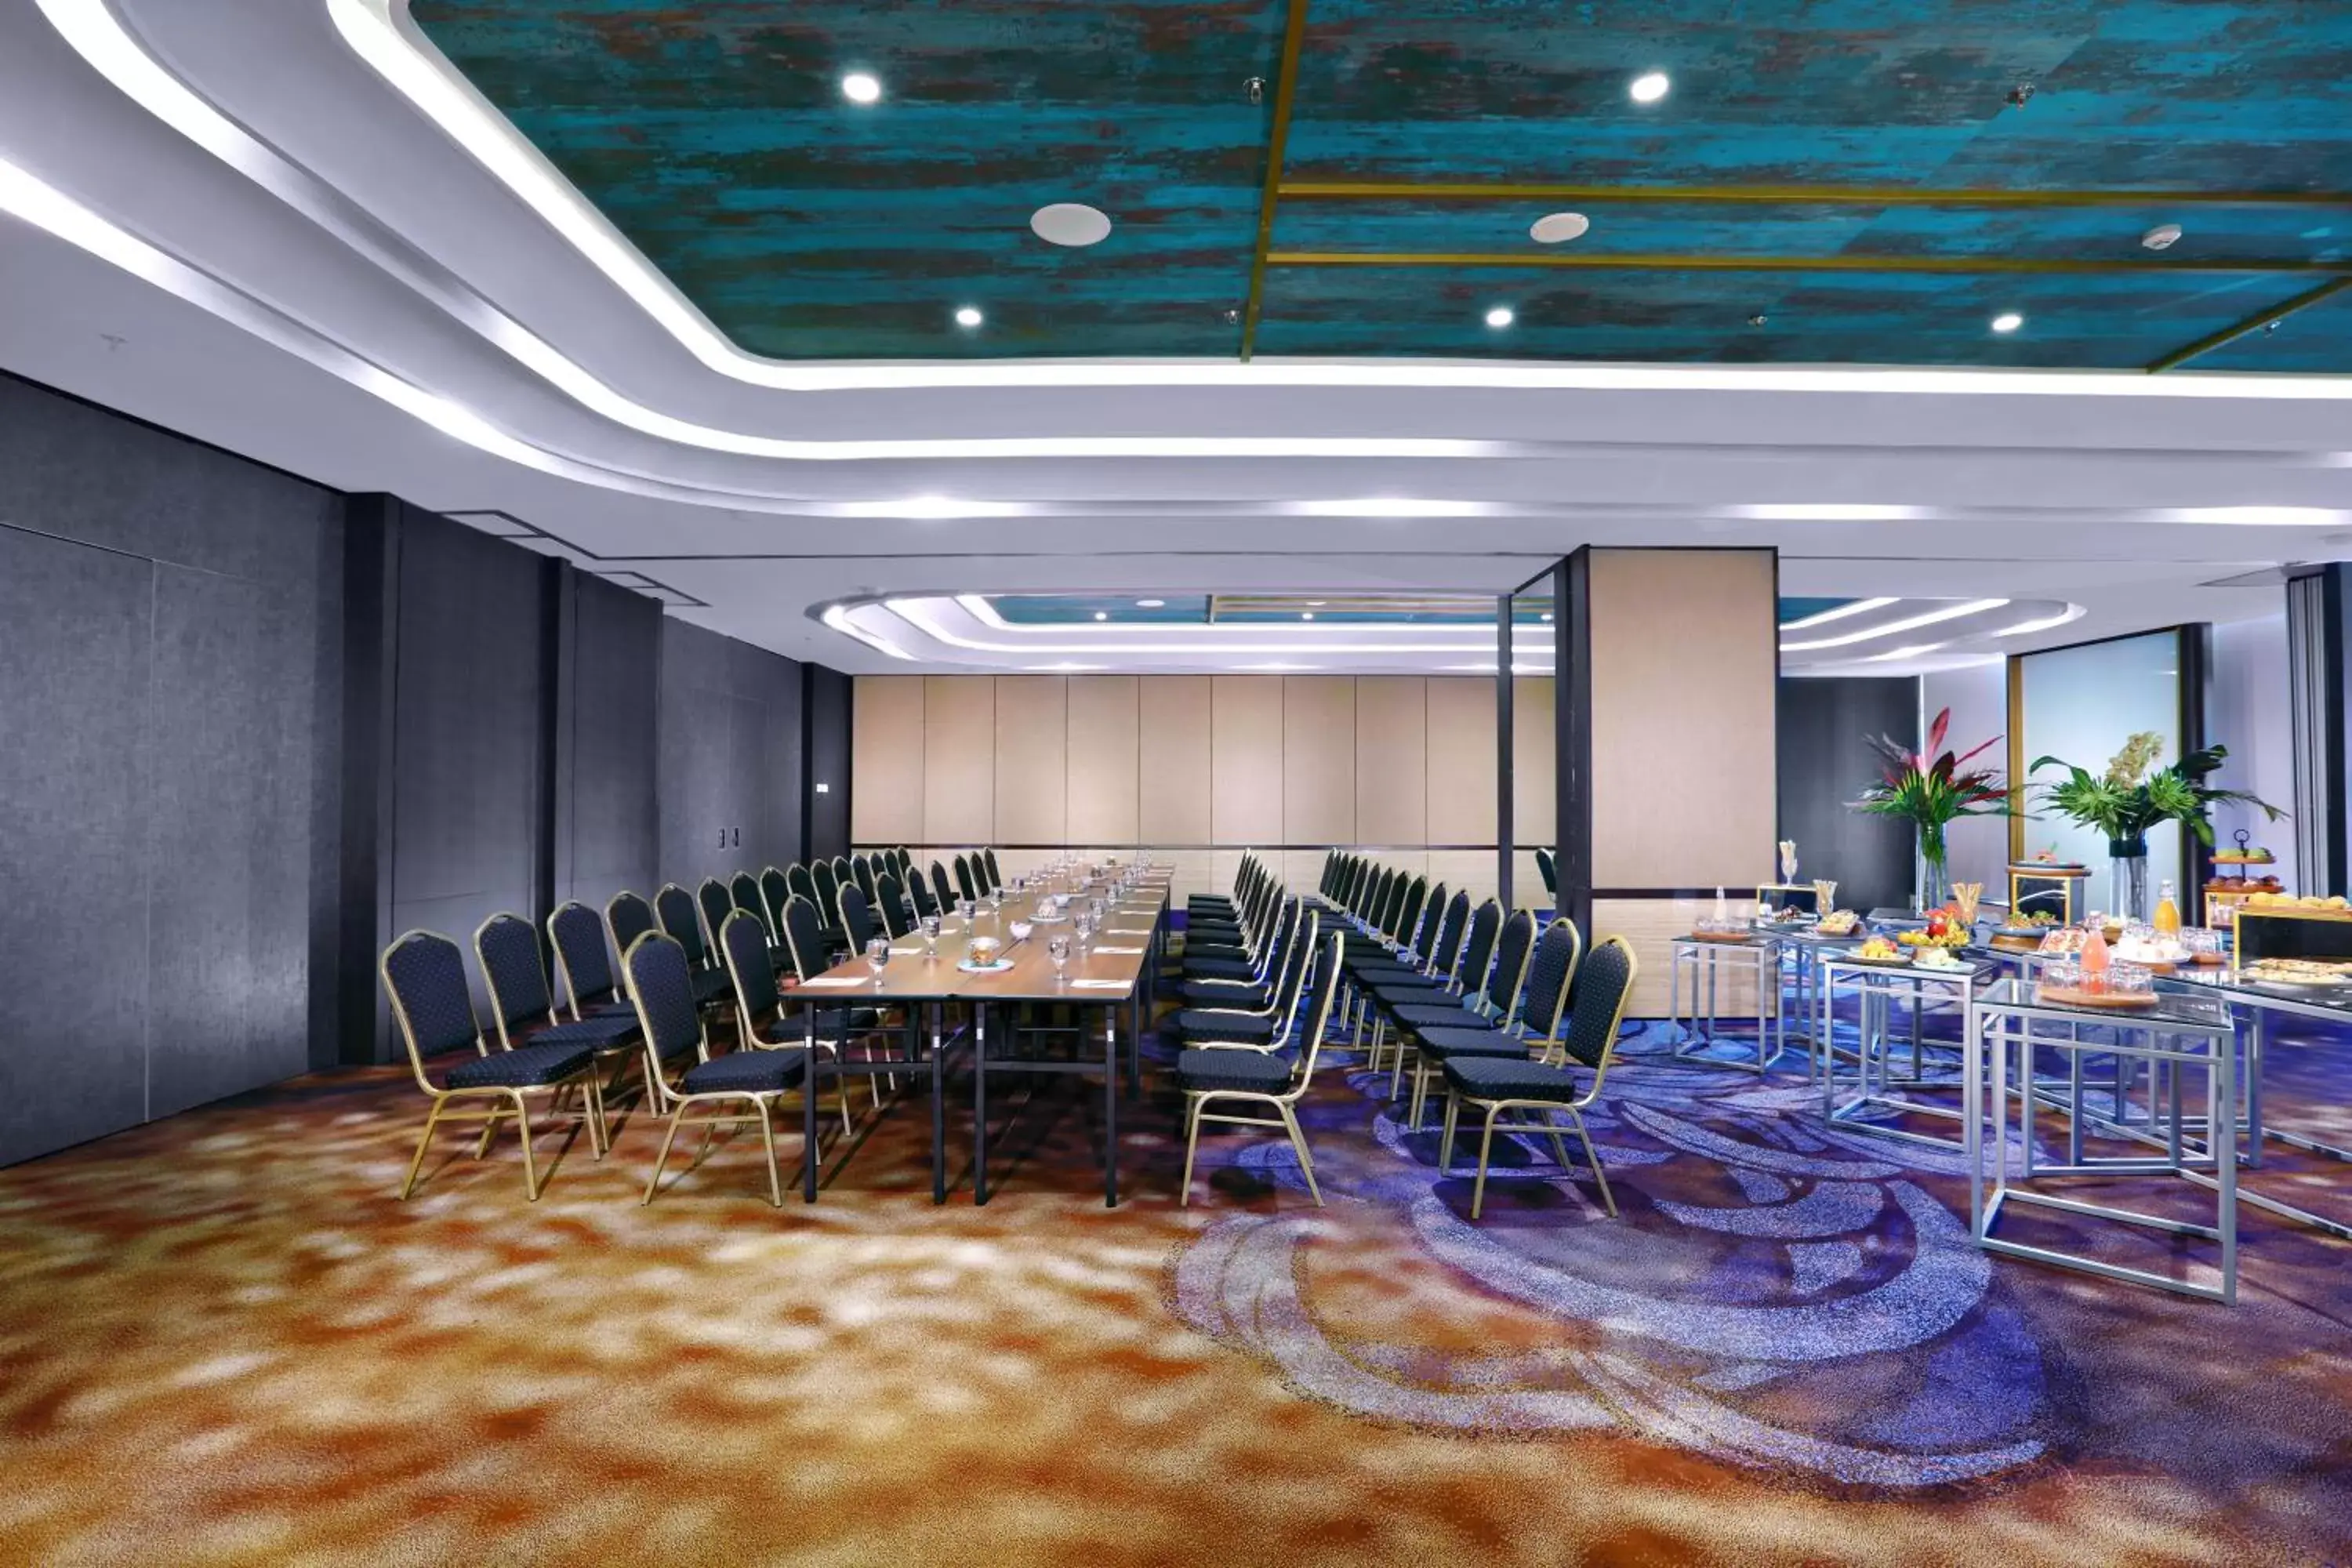 Banquet/Function facilities in The Alts Hotel